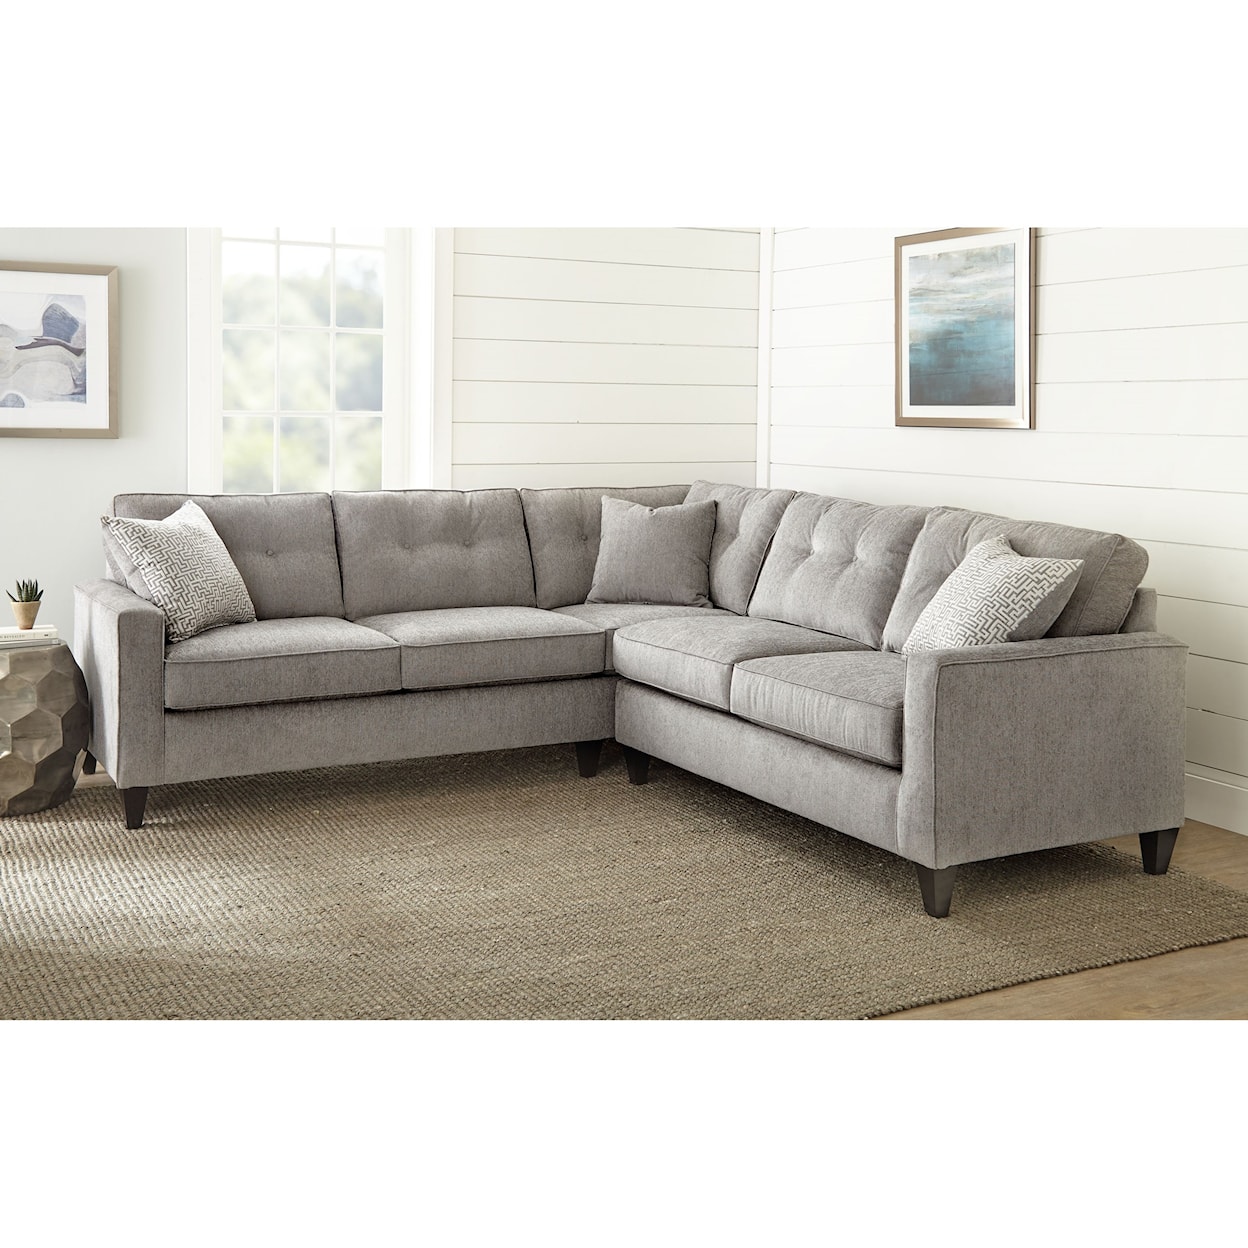 Steve Silver Maddox 2 Piece Sectional